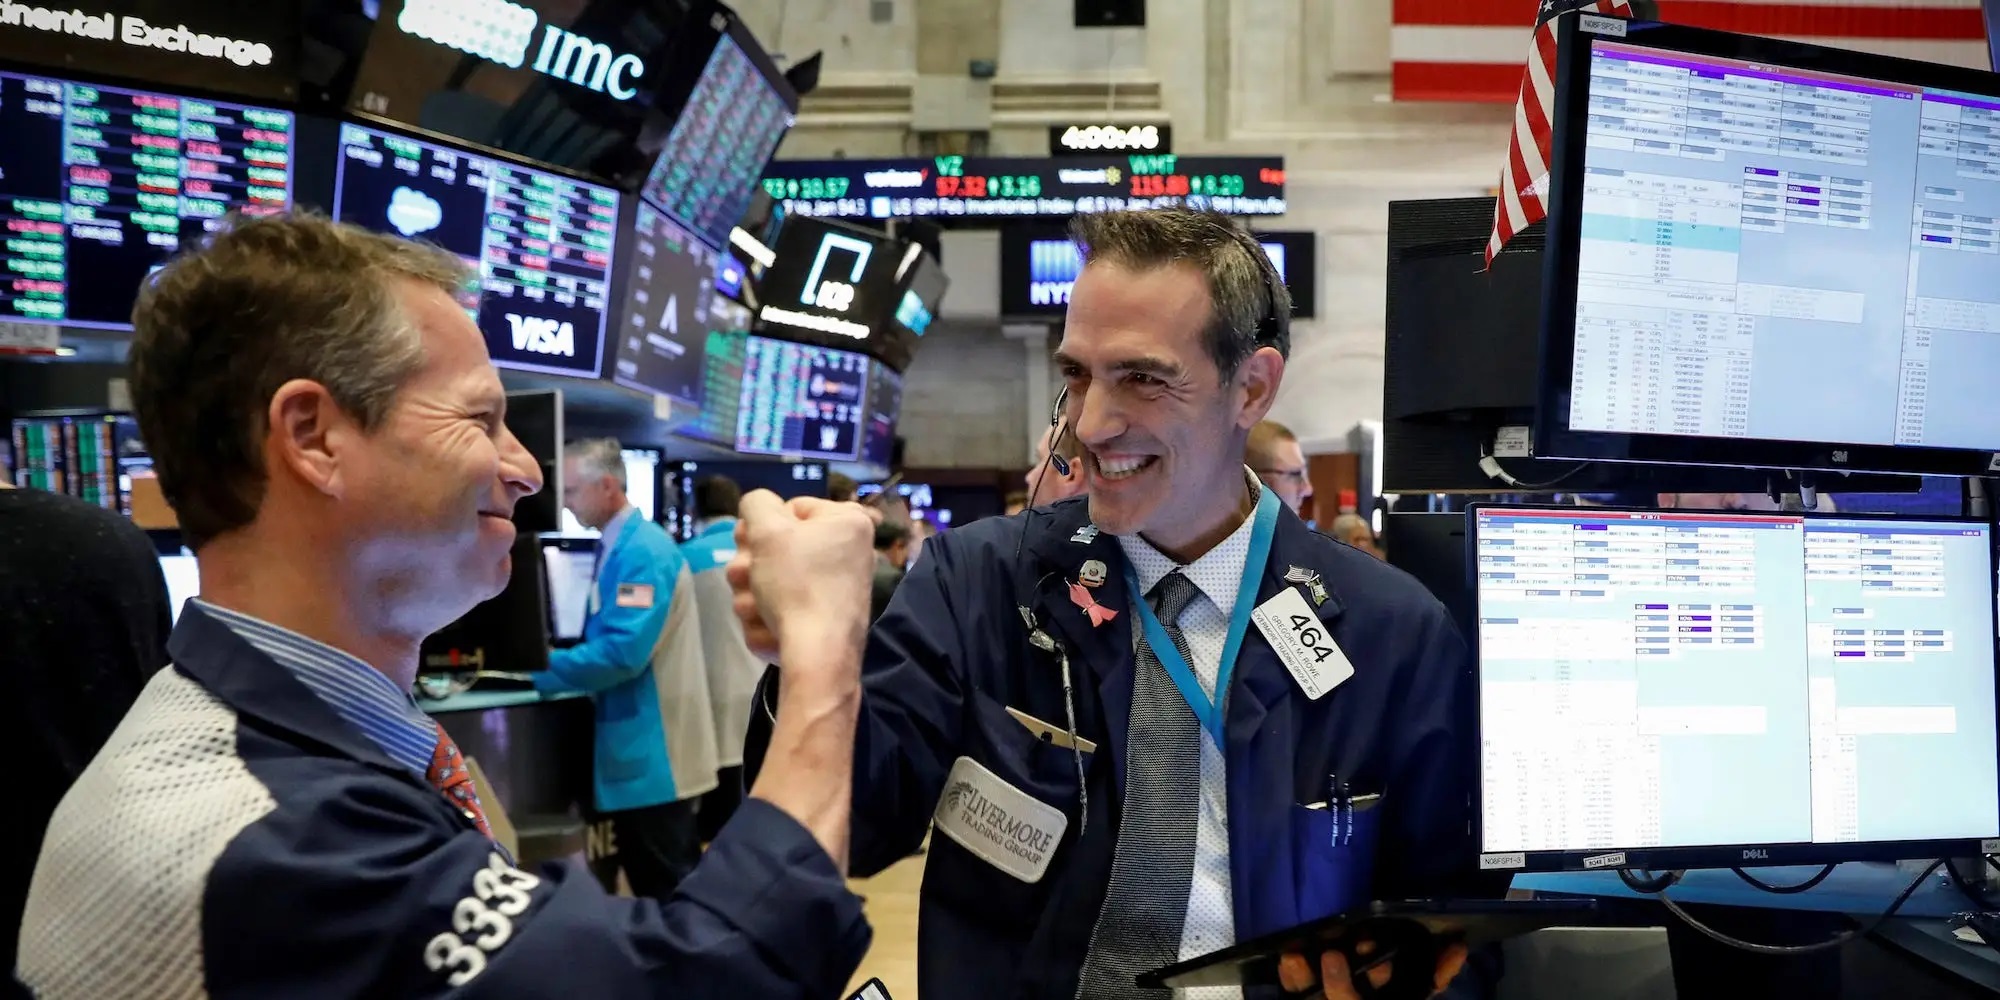 Dow Jones breaks a record with Biden becoming President and Pfizer's Vaccine News